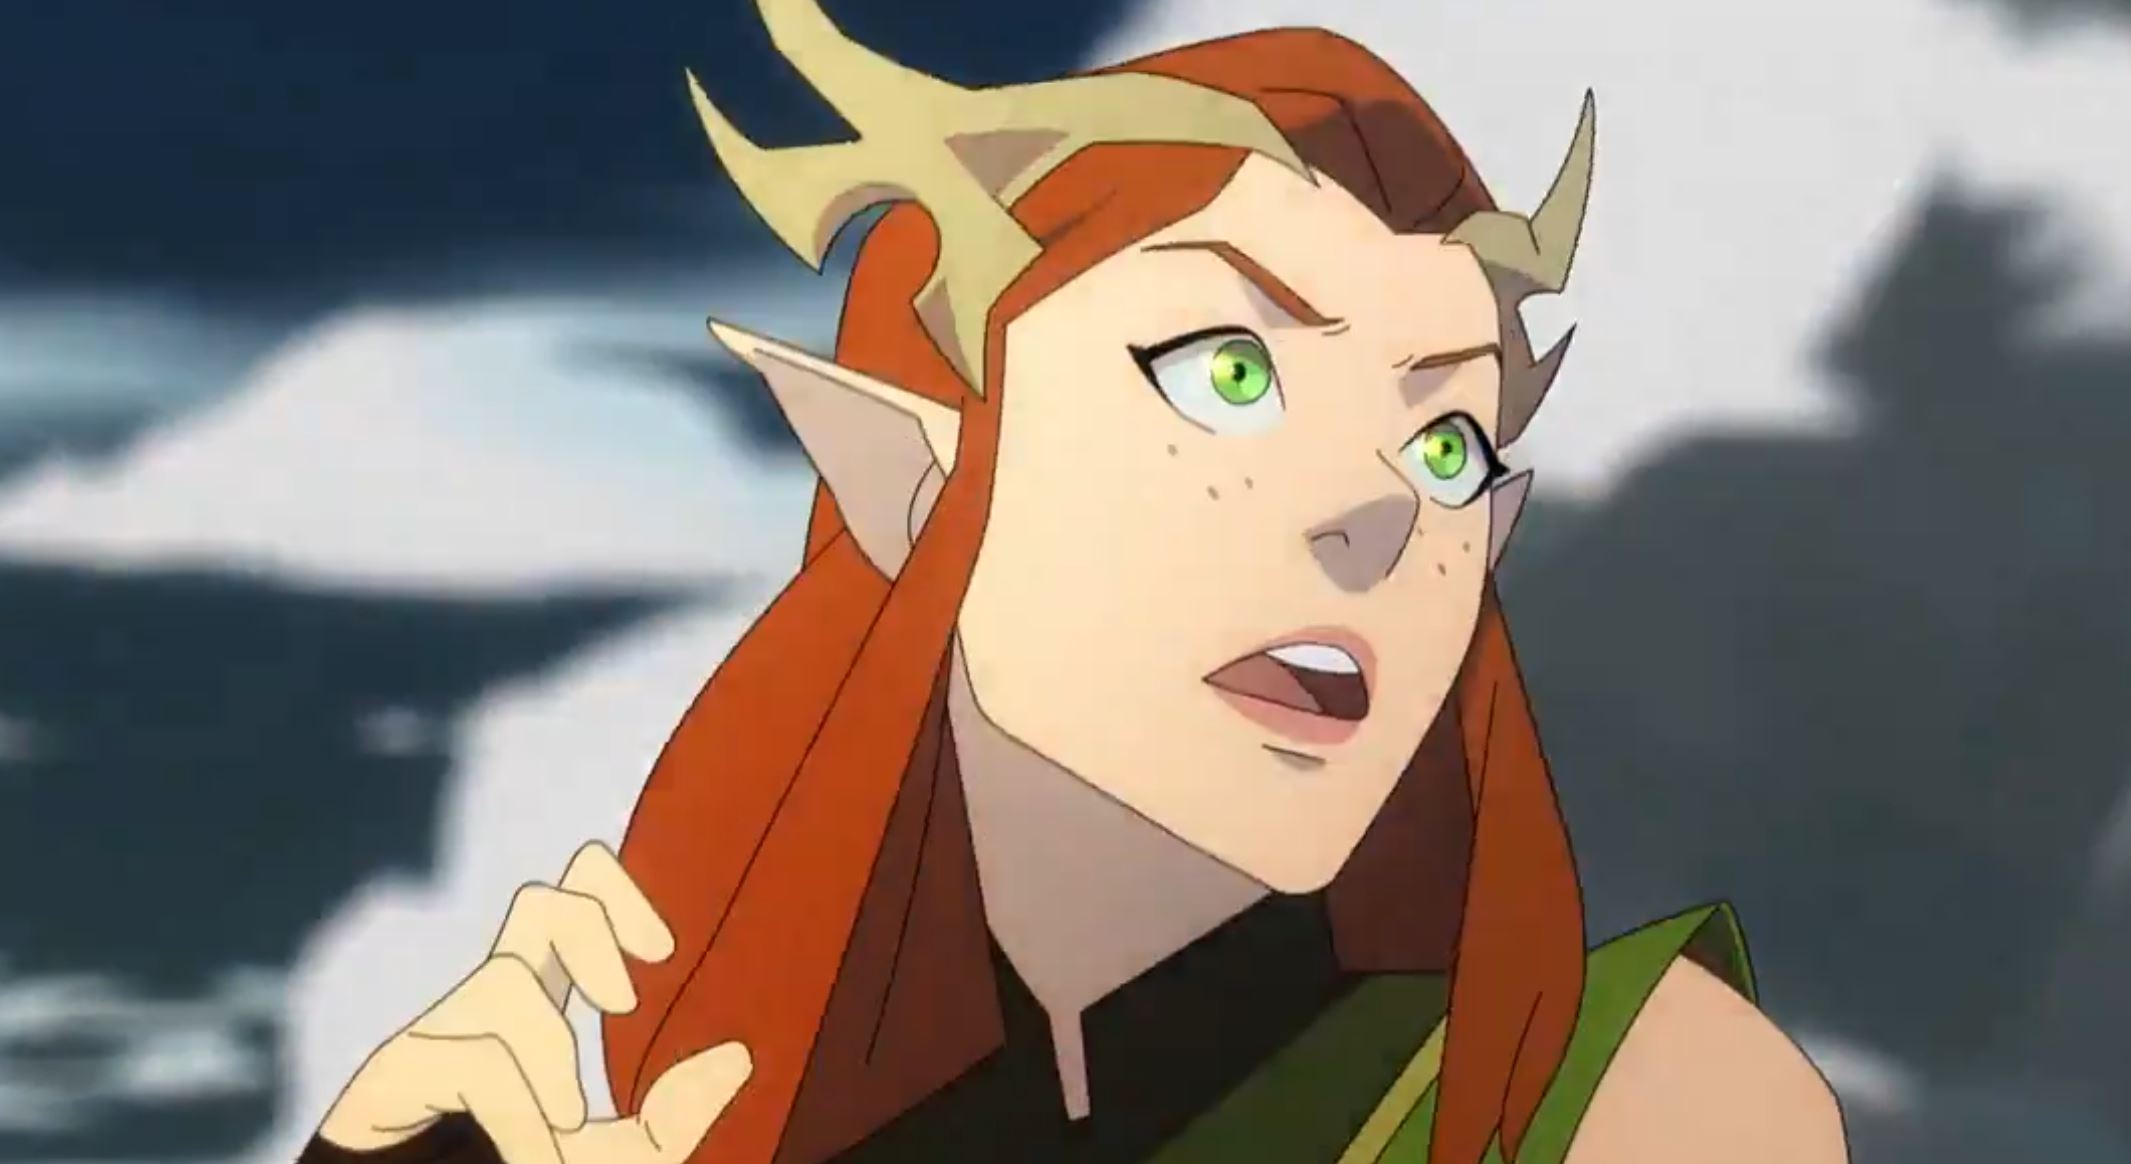 A still frame from The Legend of Vox Machina showing a character with red hair and horns.